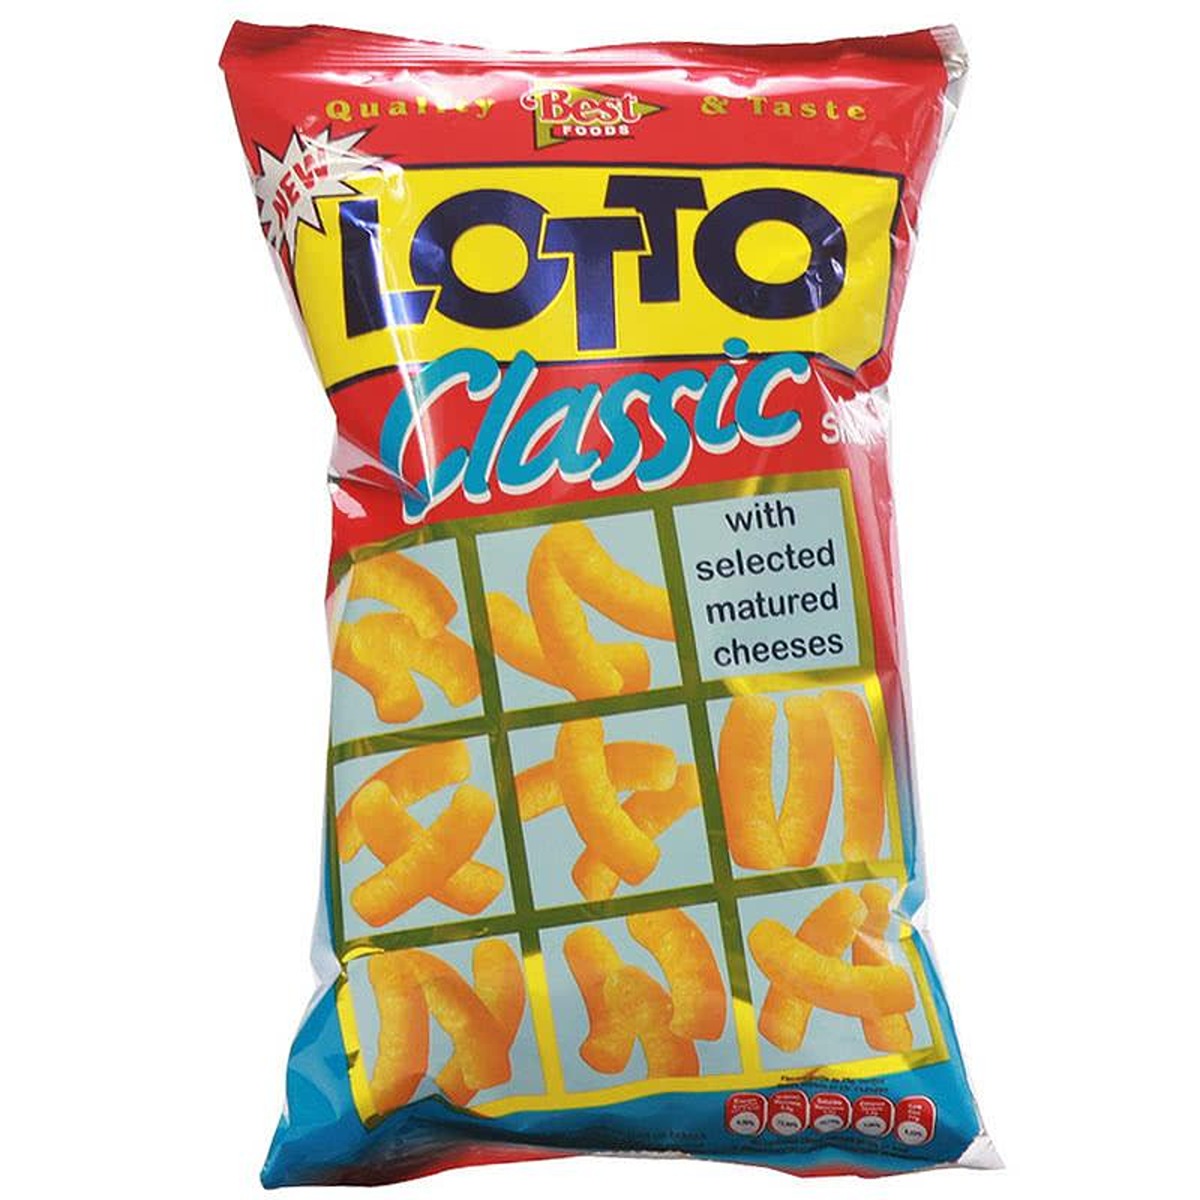 A bag of Lotto Classic chips on a white background.